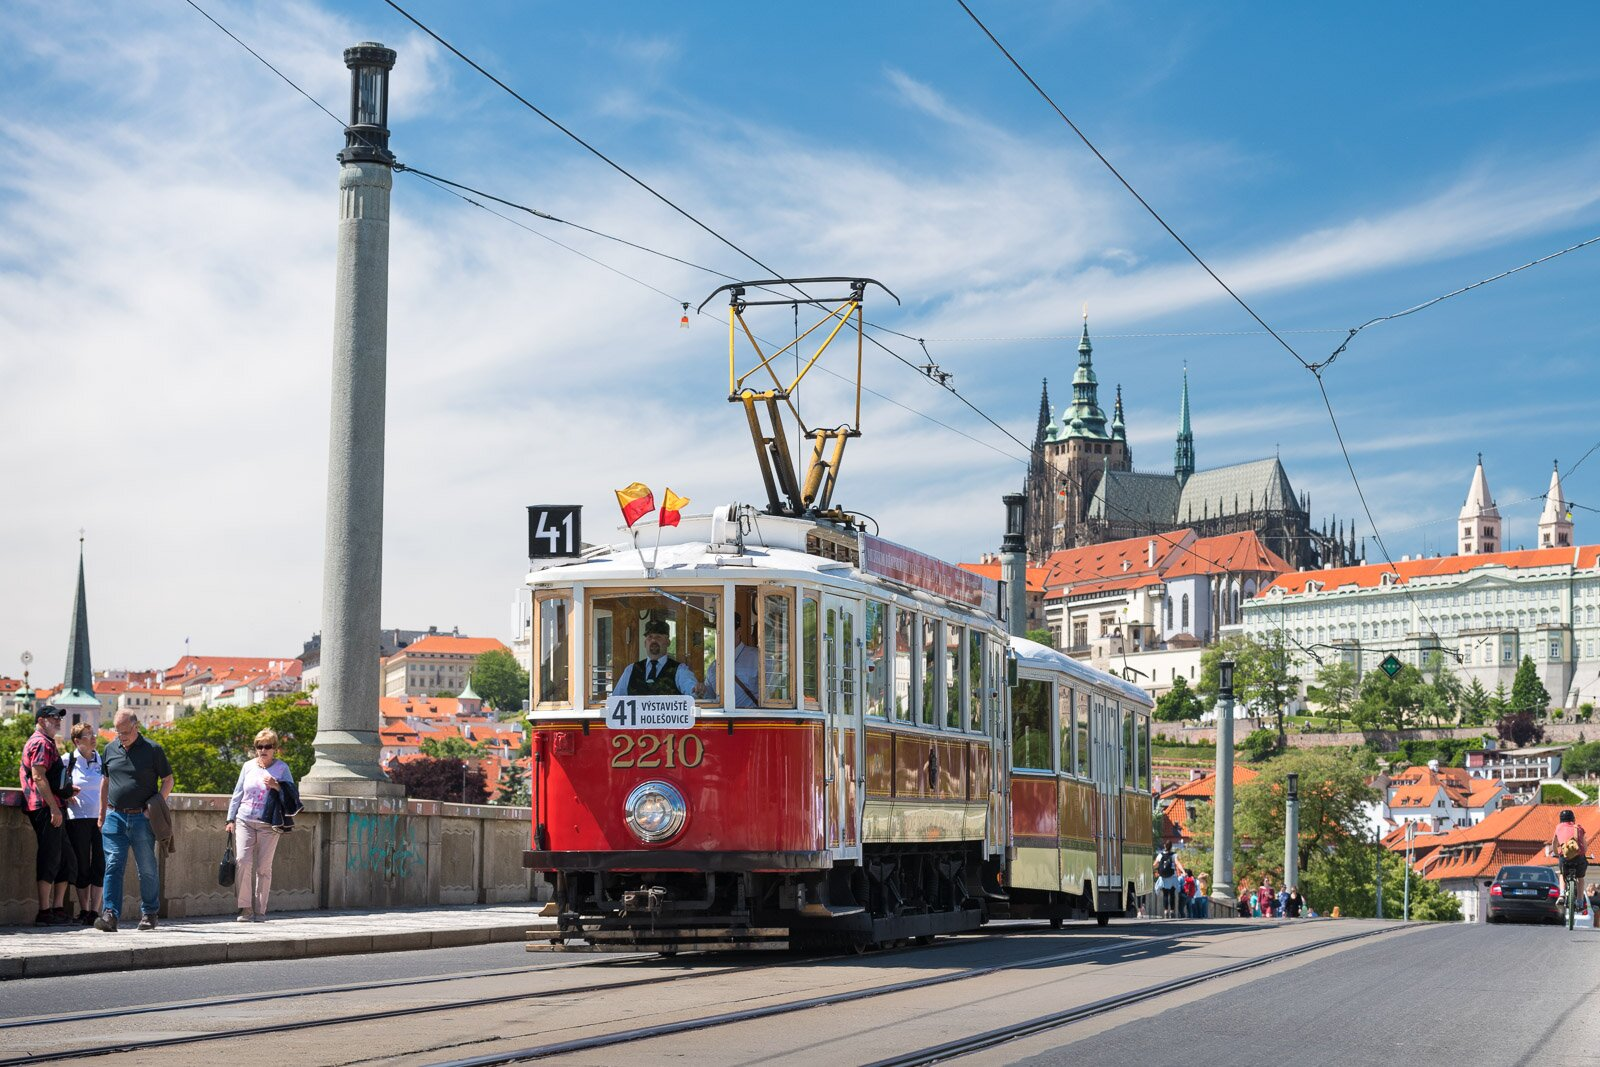 Vienna offers the Wiener Linien and Ring Tram which are bus and tram services offering a convenient travel option throughout the city. With Ring Tram, you can hop on and off to create your own tour. 